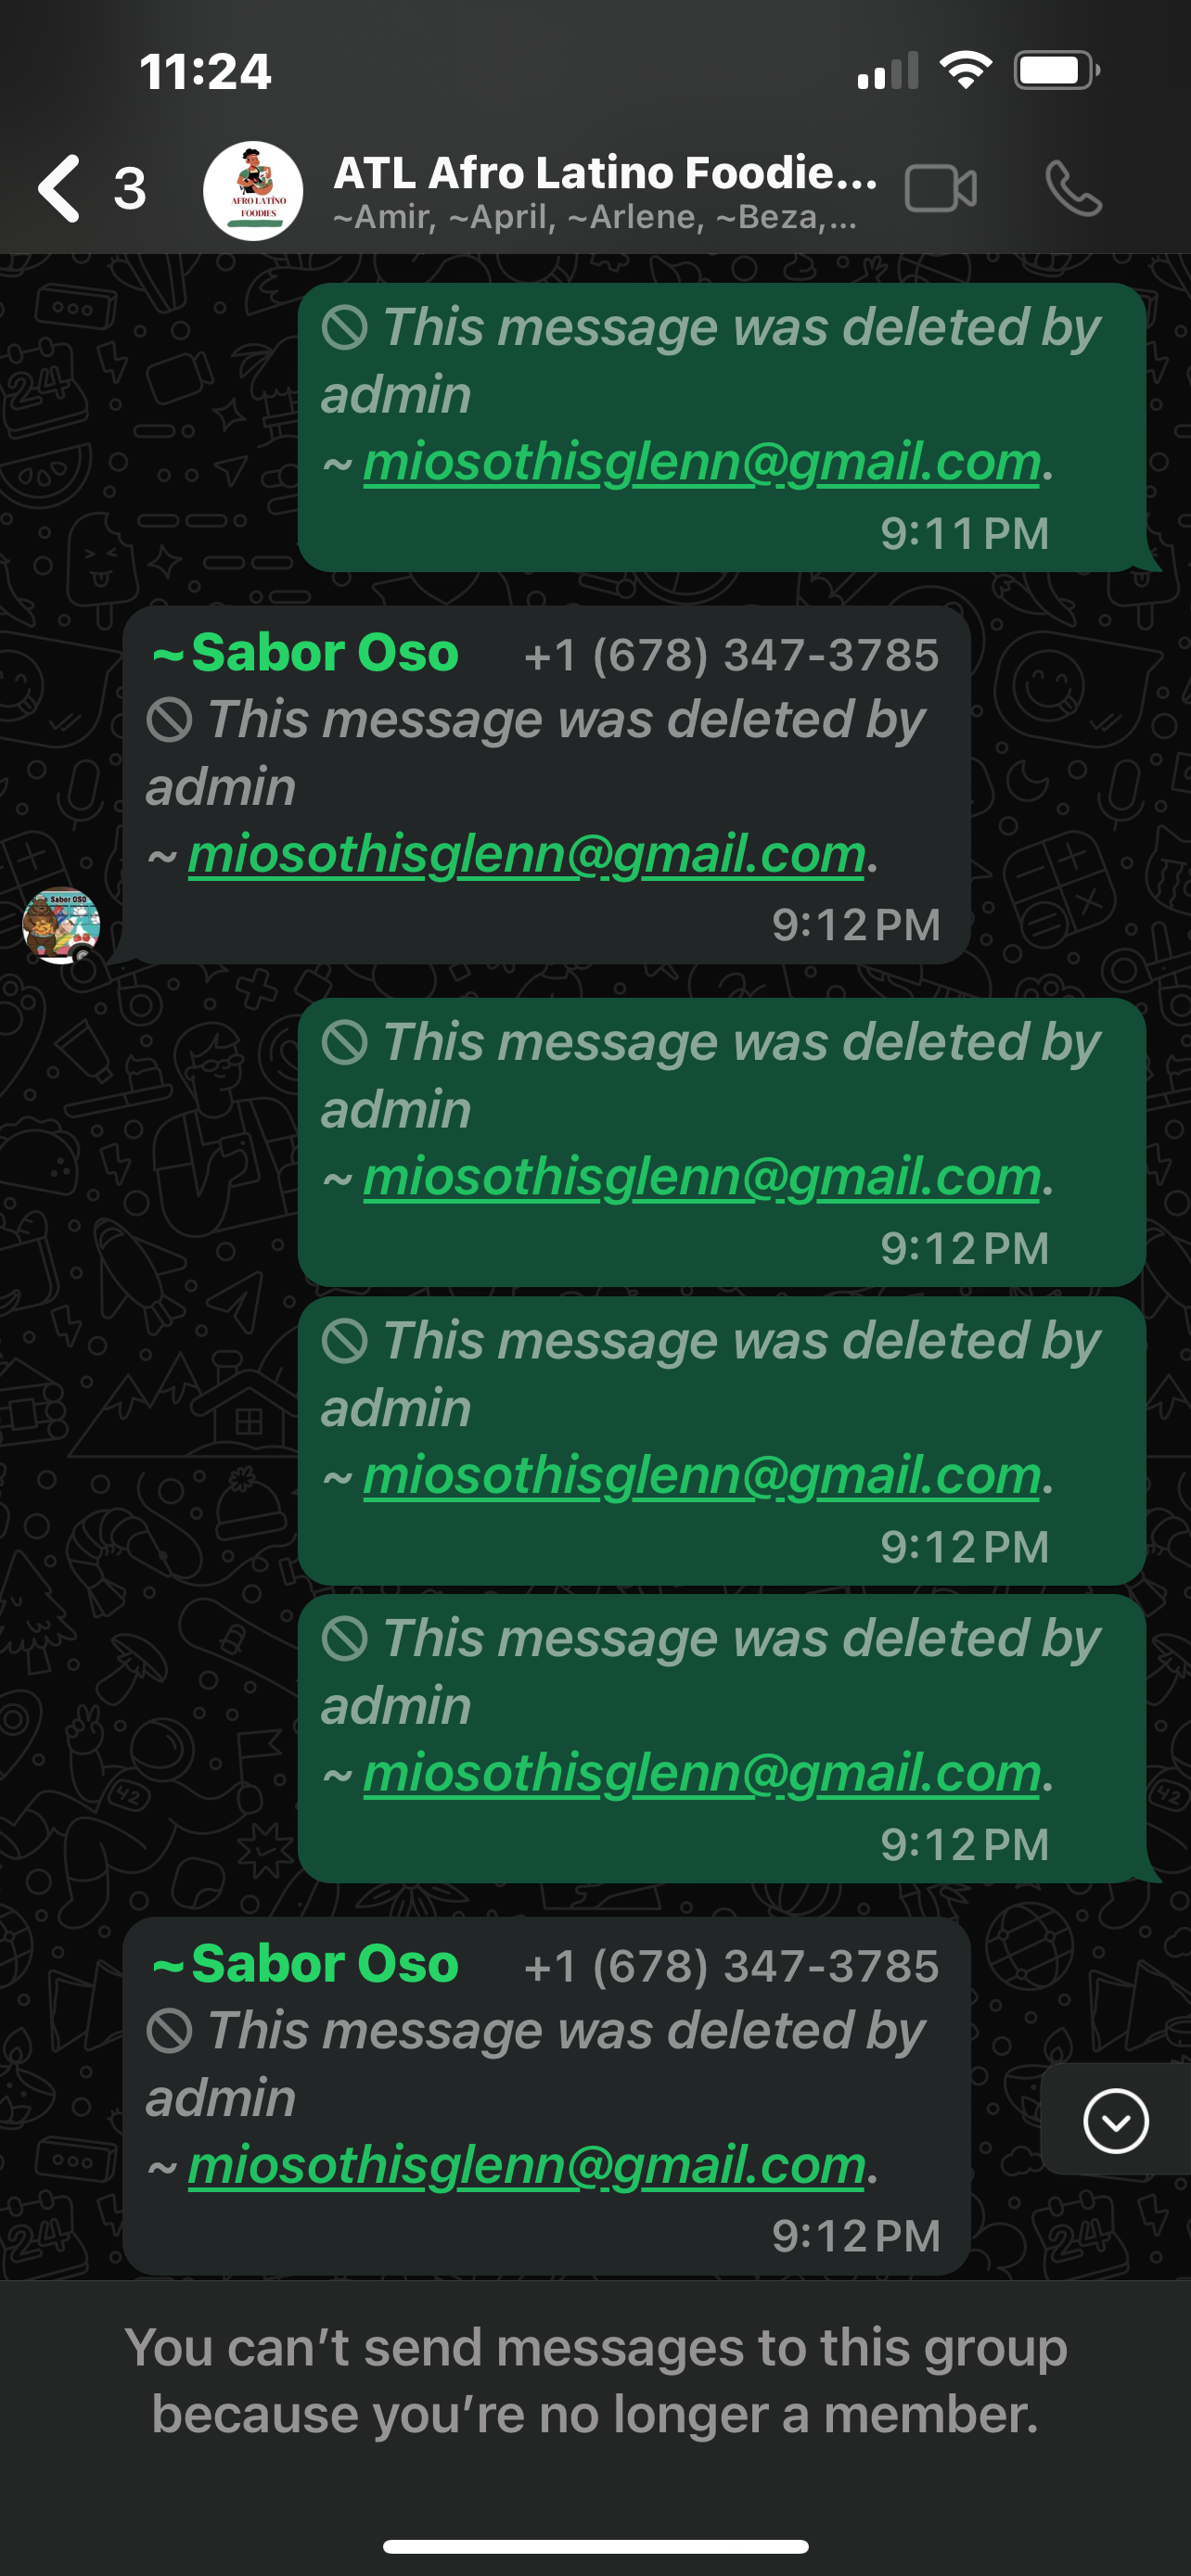 Owner deleting peoples messages